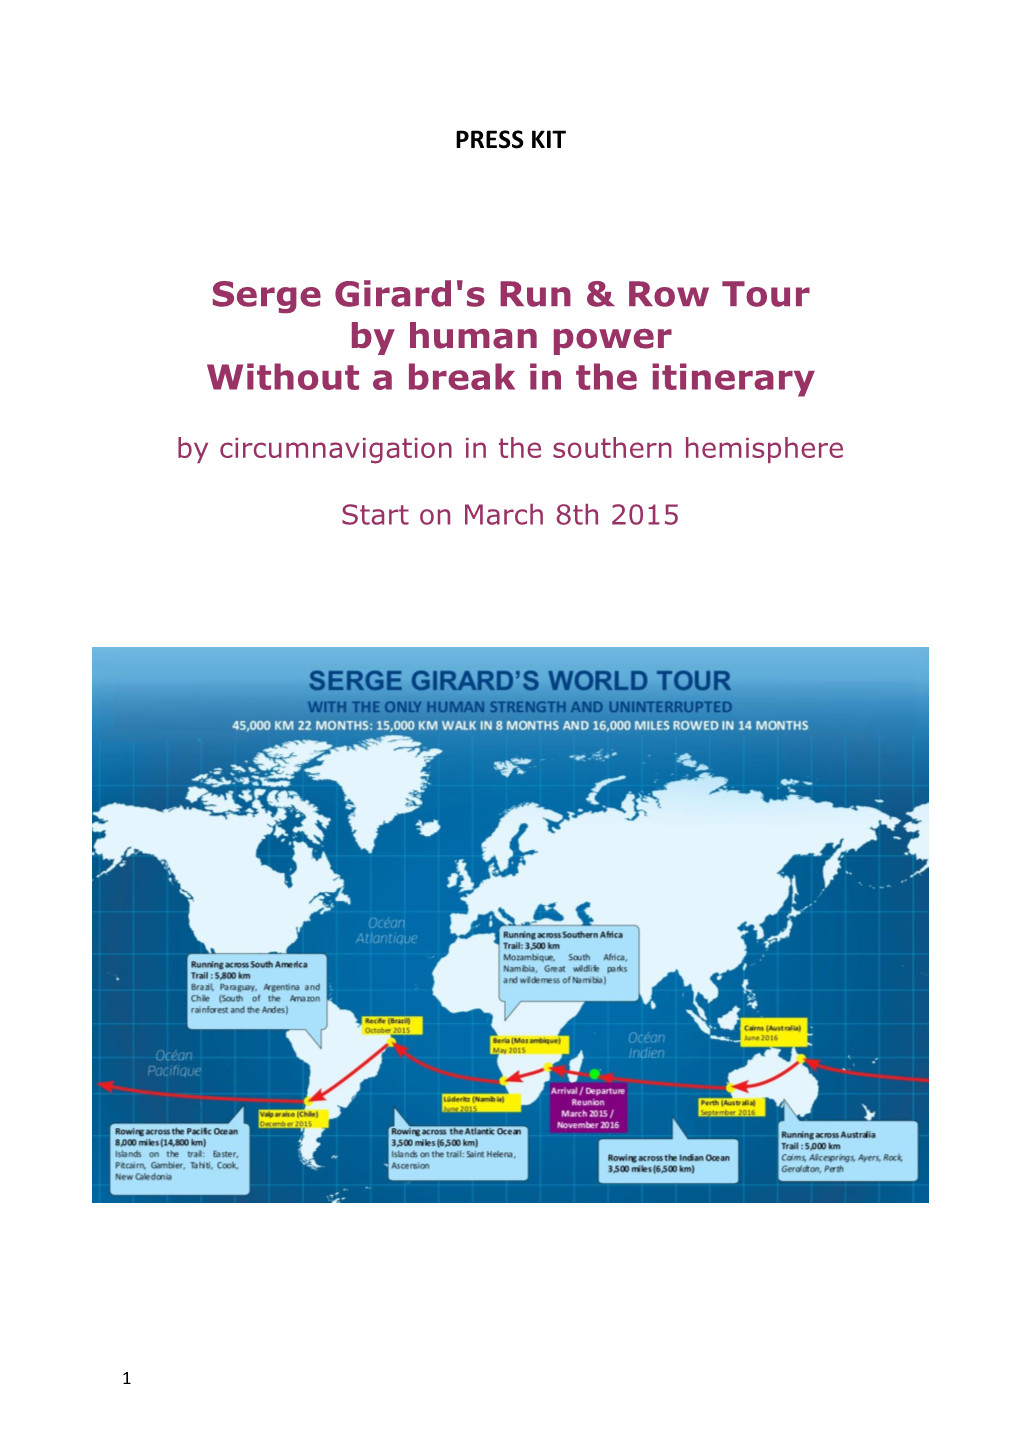 Serge Girard's Run & Row Tour by Human Power Without a Break In